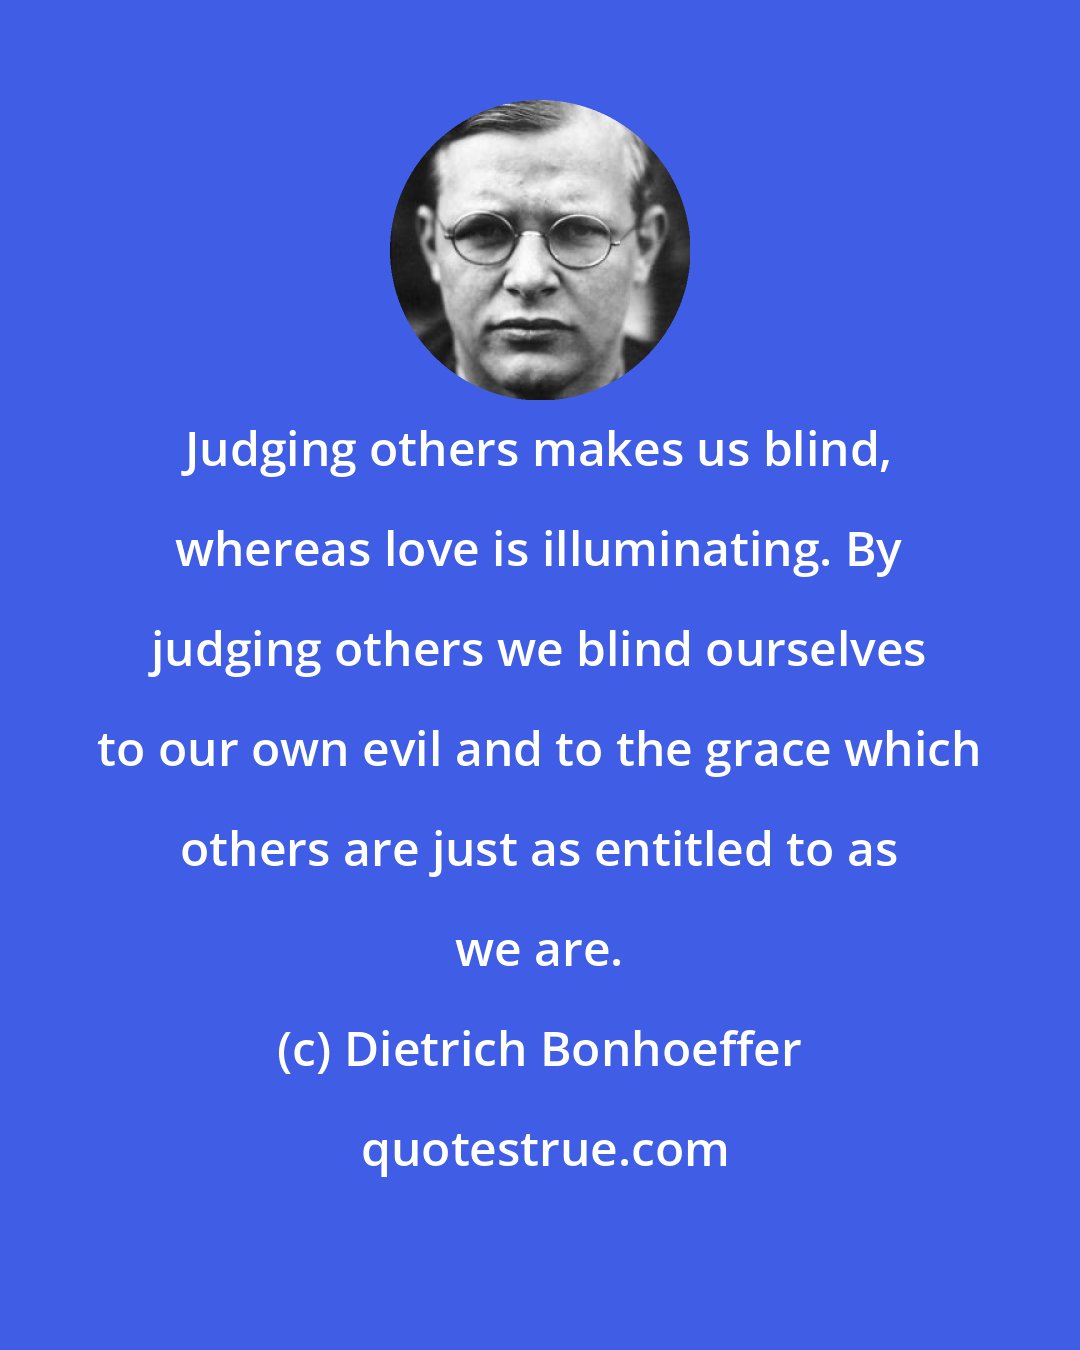 Dietrich Bonhoeffer: Judging others makes us blind, whereas love is illuminating. By judging others we blind ourselves to our own evil and to the grace which others are just as entitled to as we are.